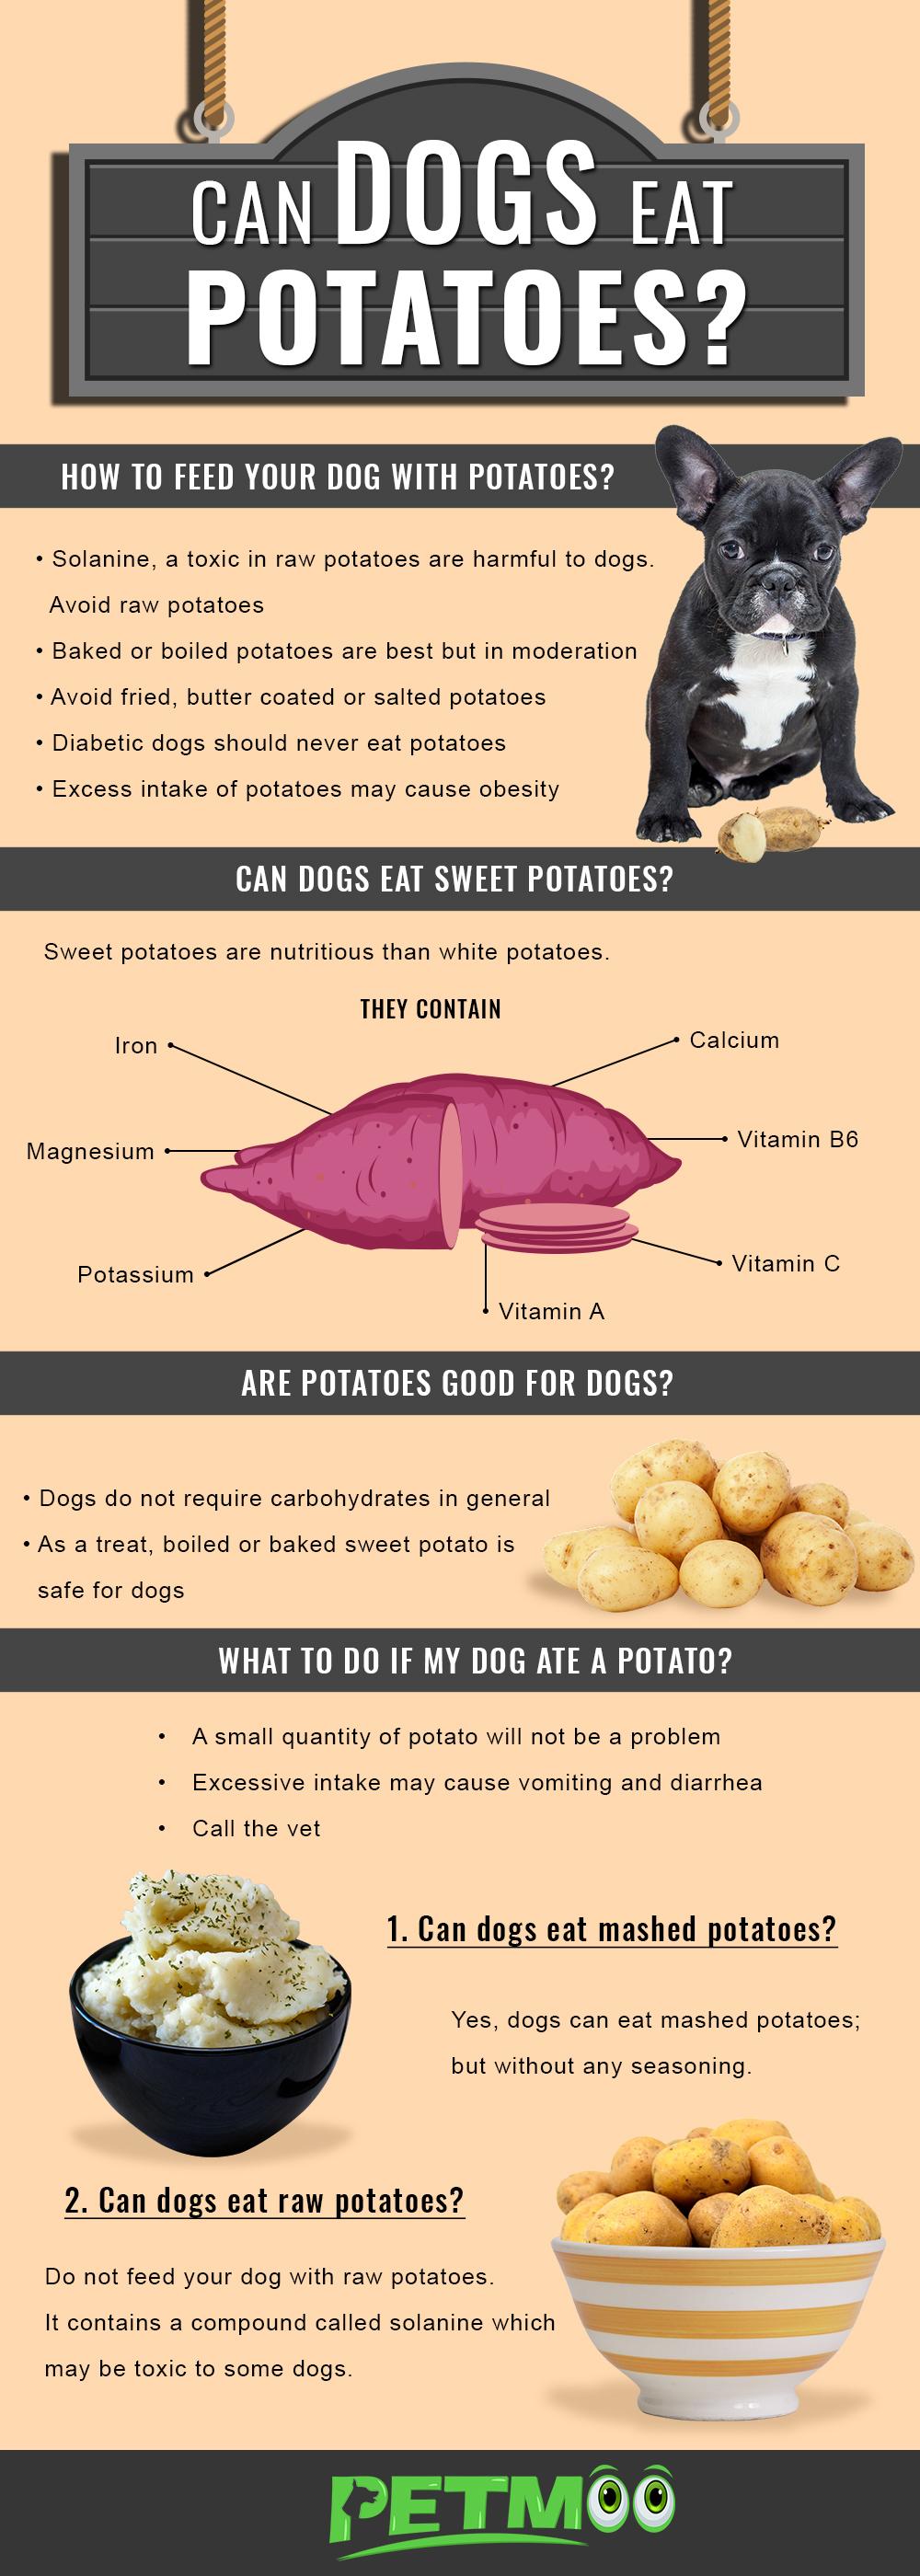 Are Potatoes Good for Dogs in Dog Food?